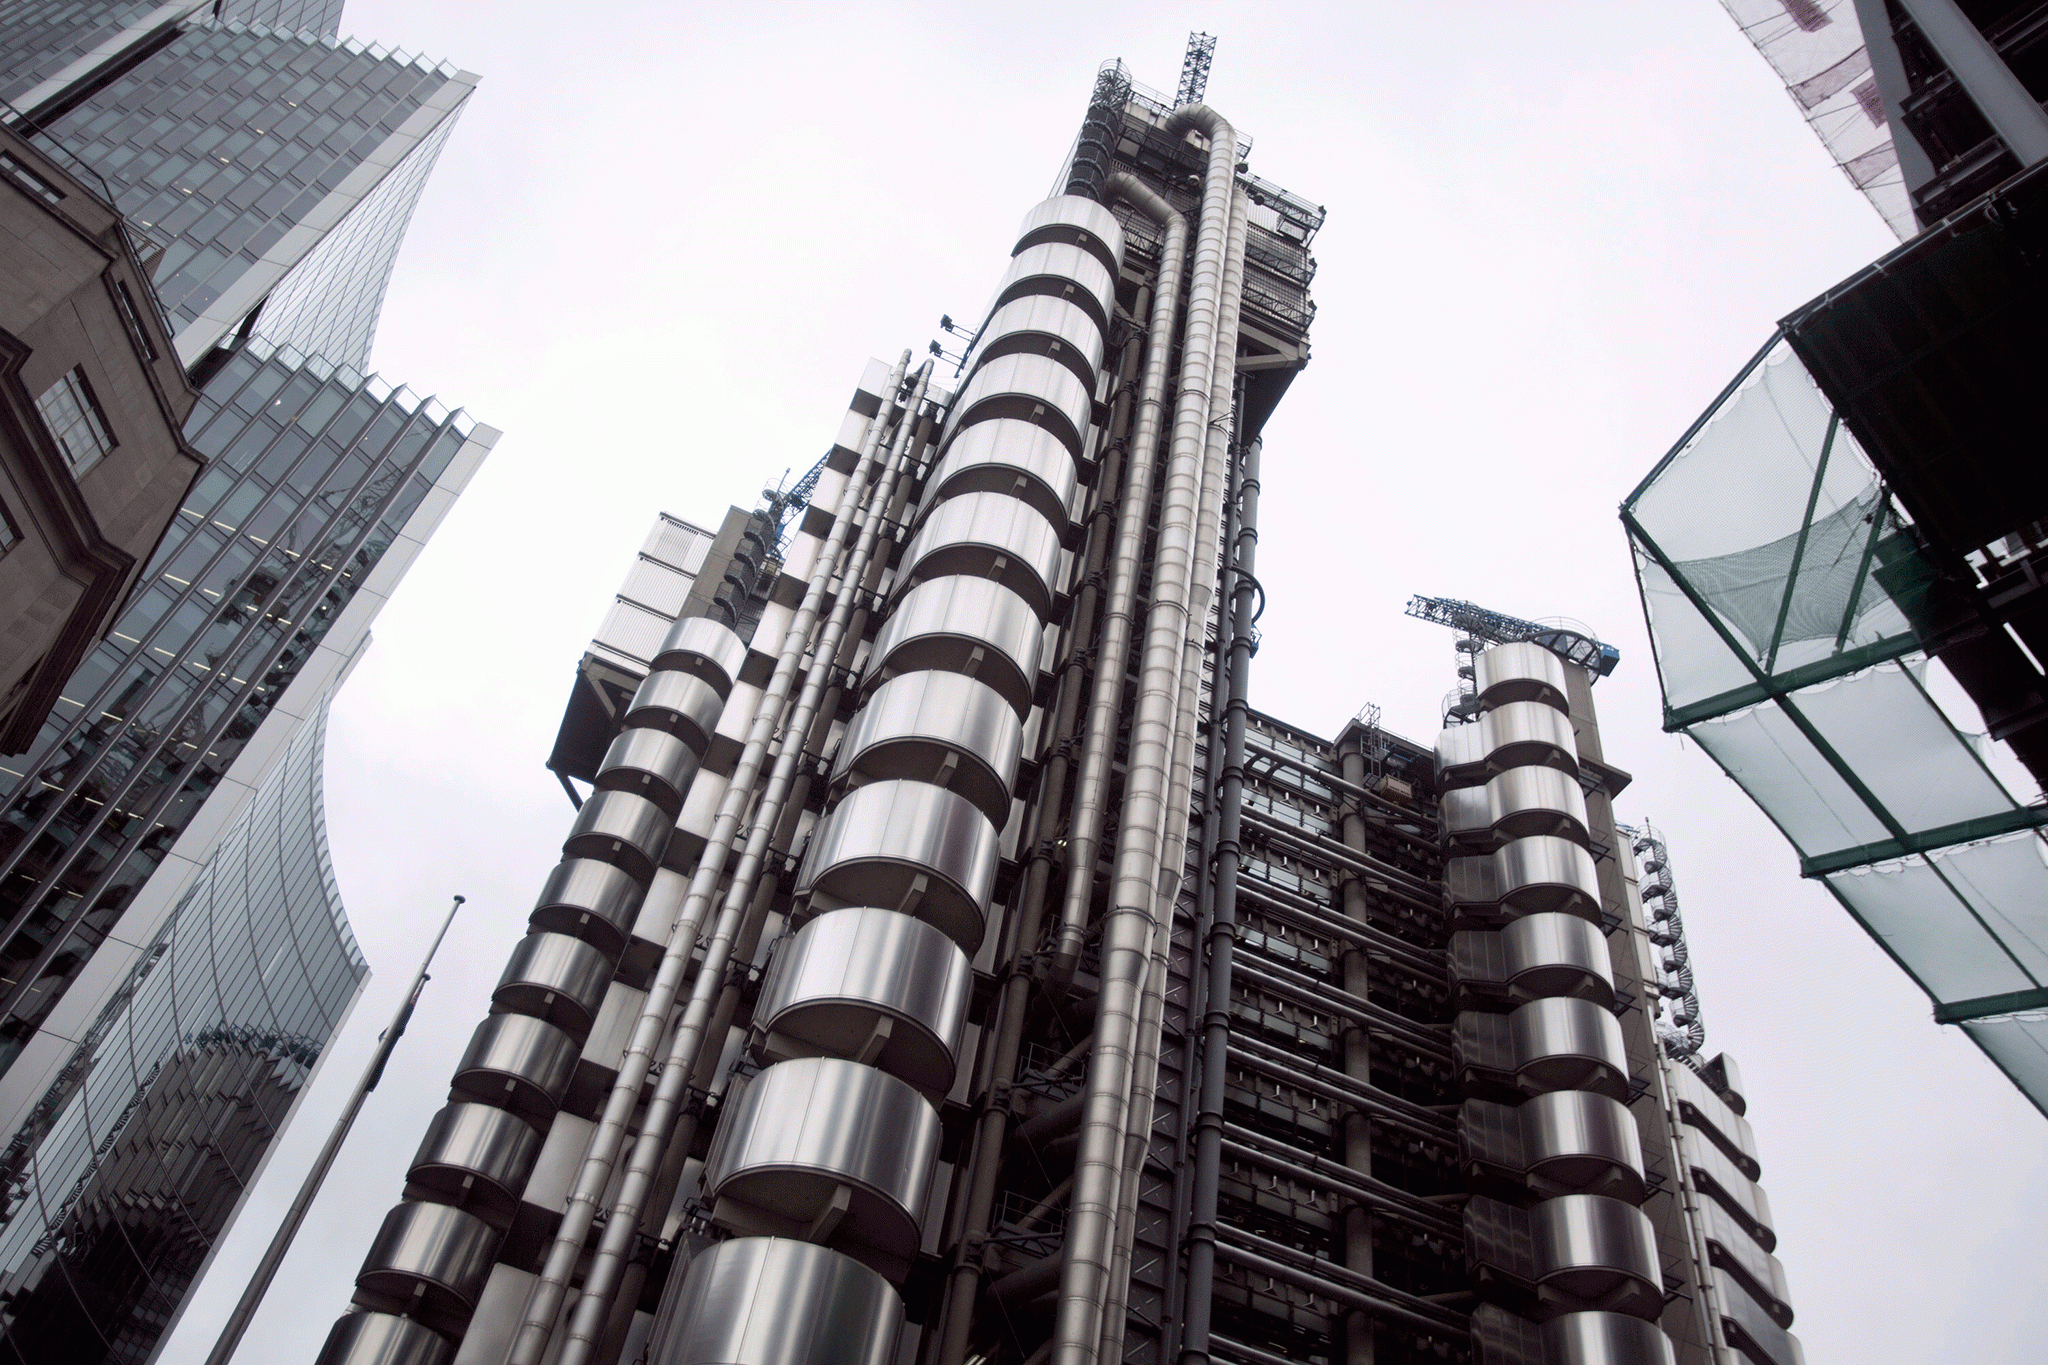 The iconic Richard Rogers-designed Lloyd’s of London building in the City